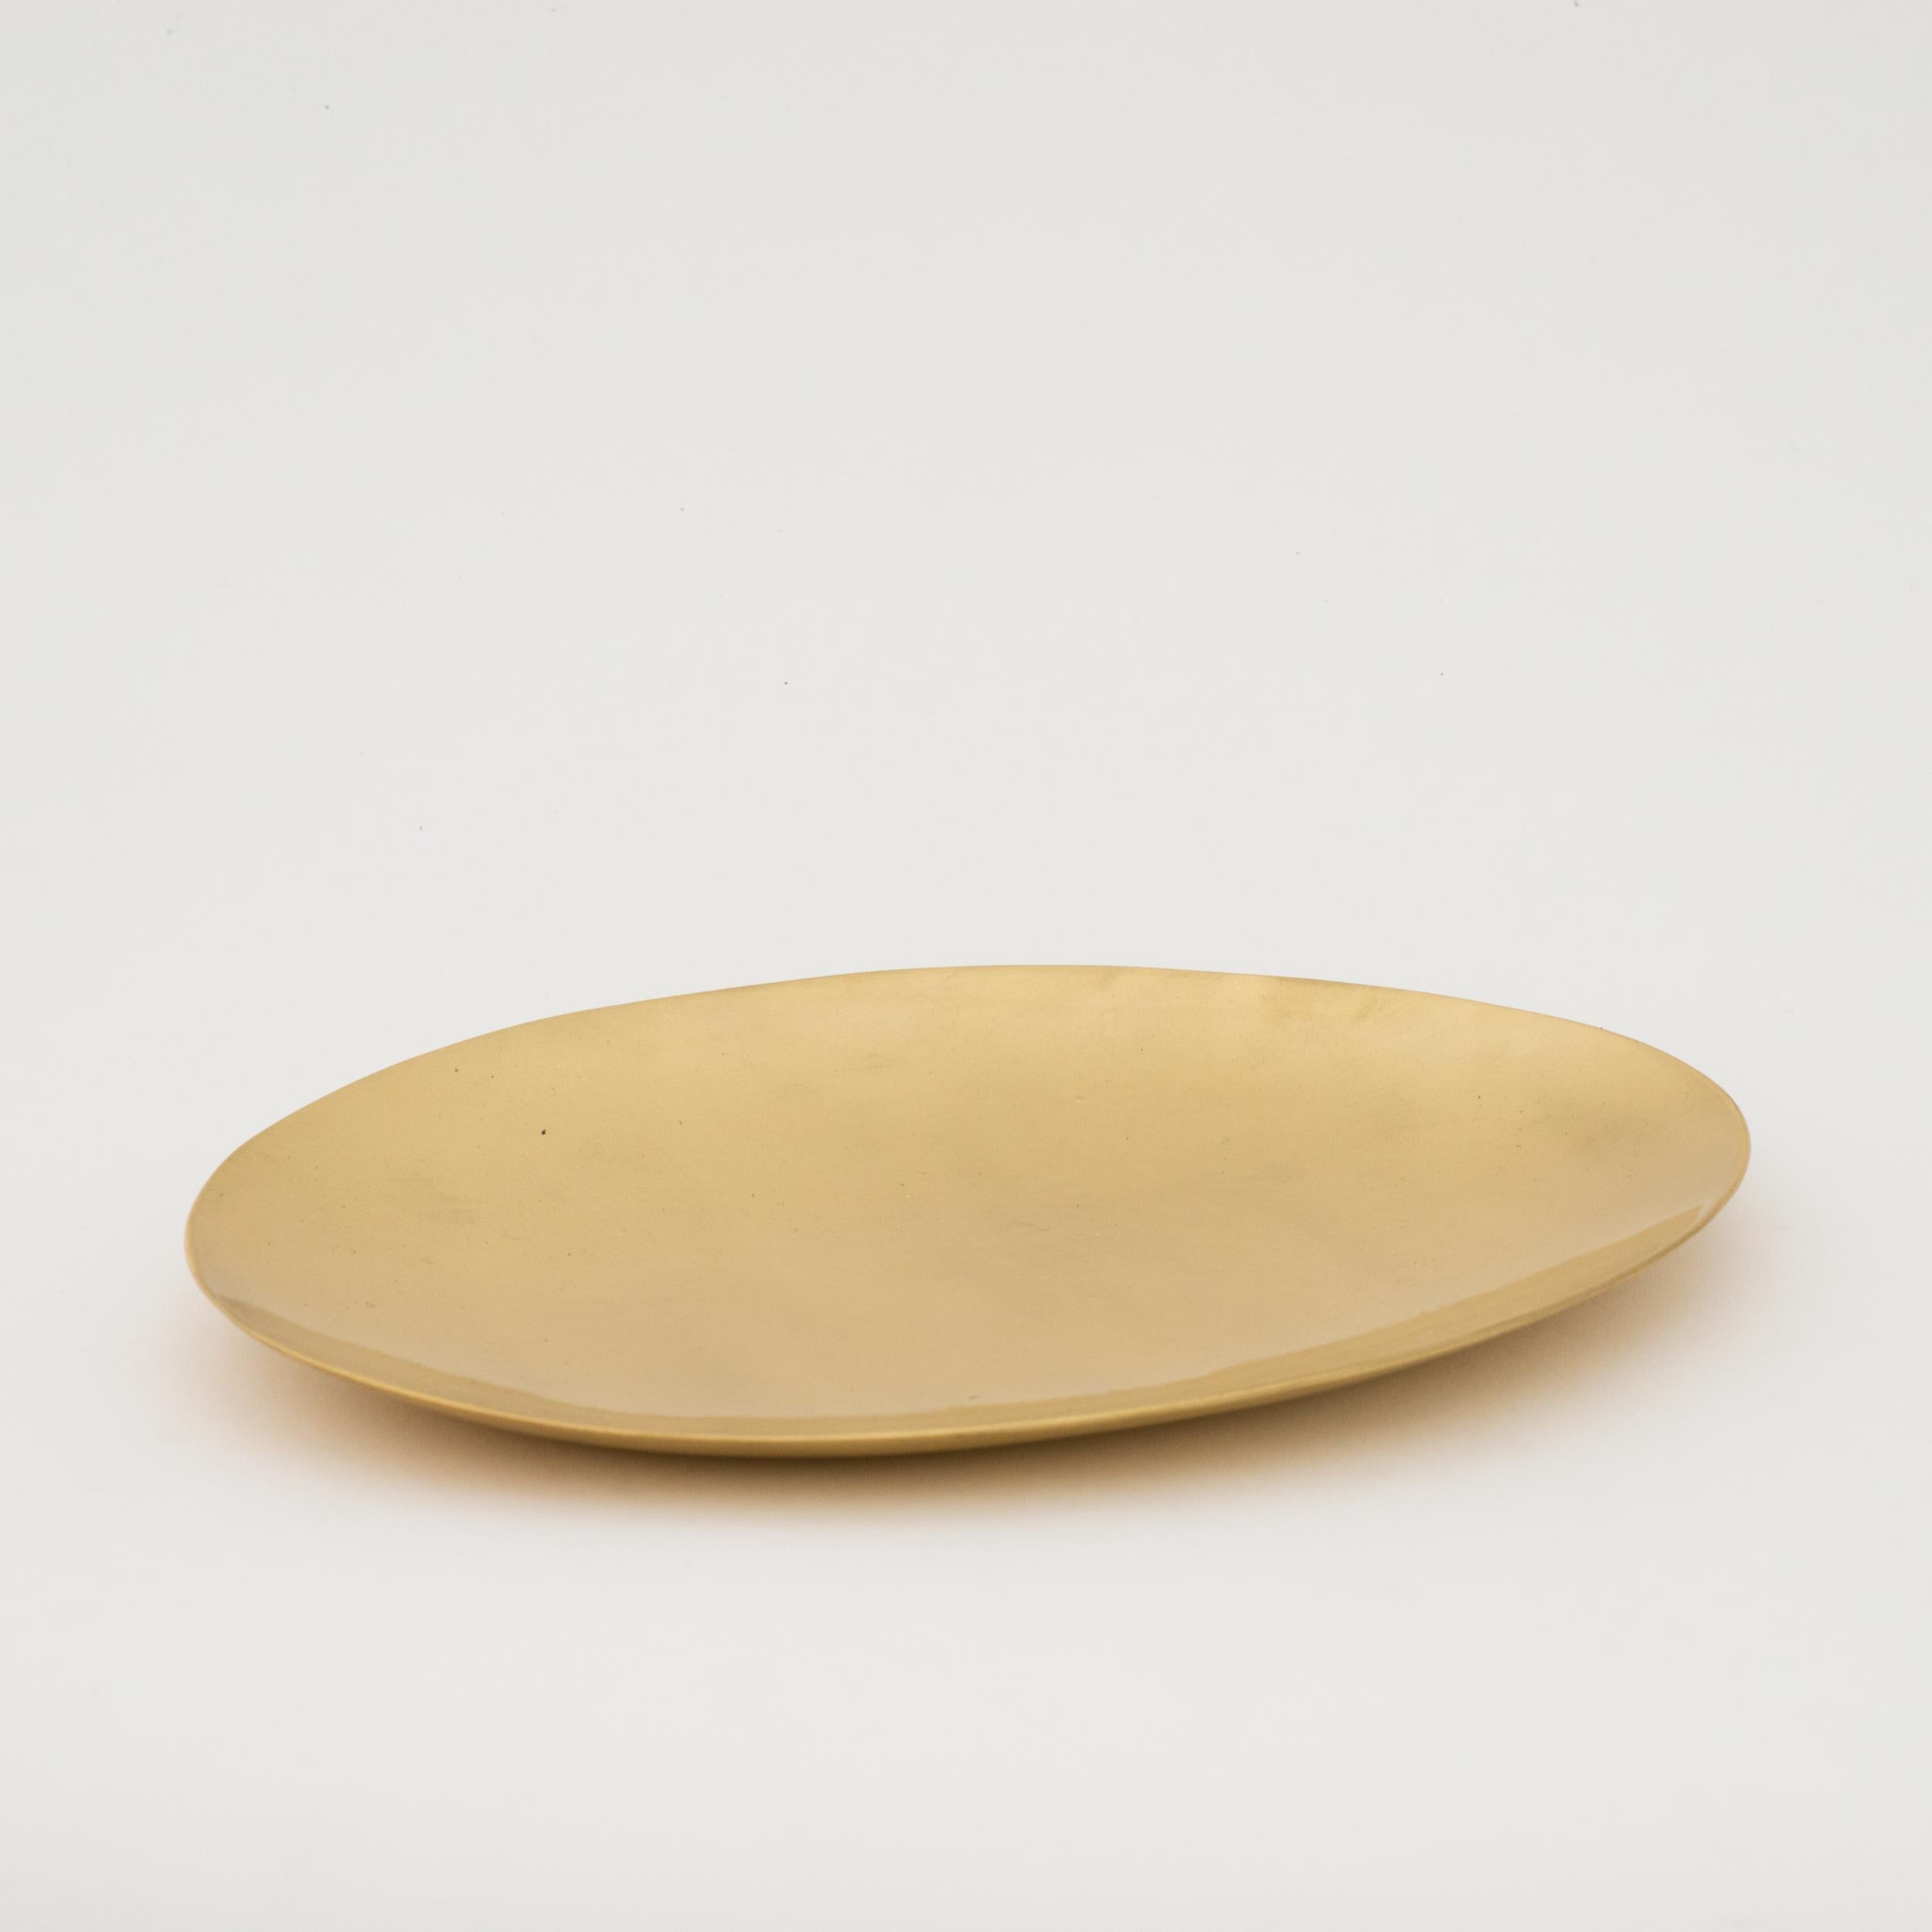 Set of three elegant handmade brass plates. Cast using very traditional techniques, their brushed matt finish makes them very elegant.

Very charming as decorative objects, they also work very well as plates for pillar candles.

Slight variations in